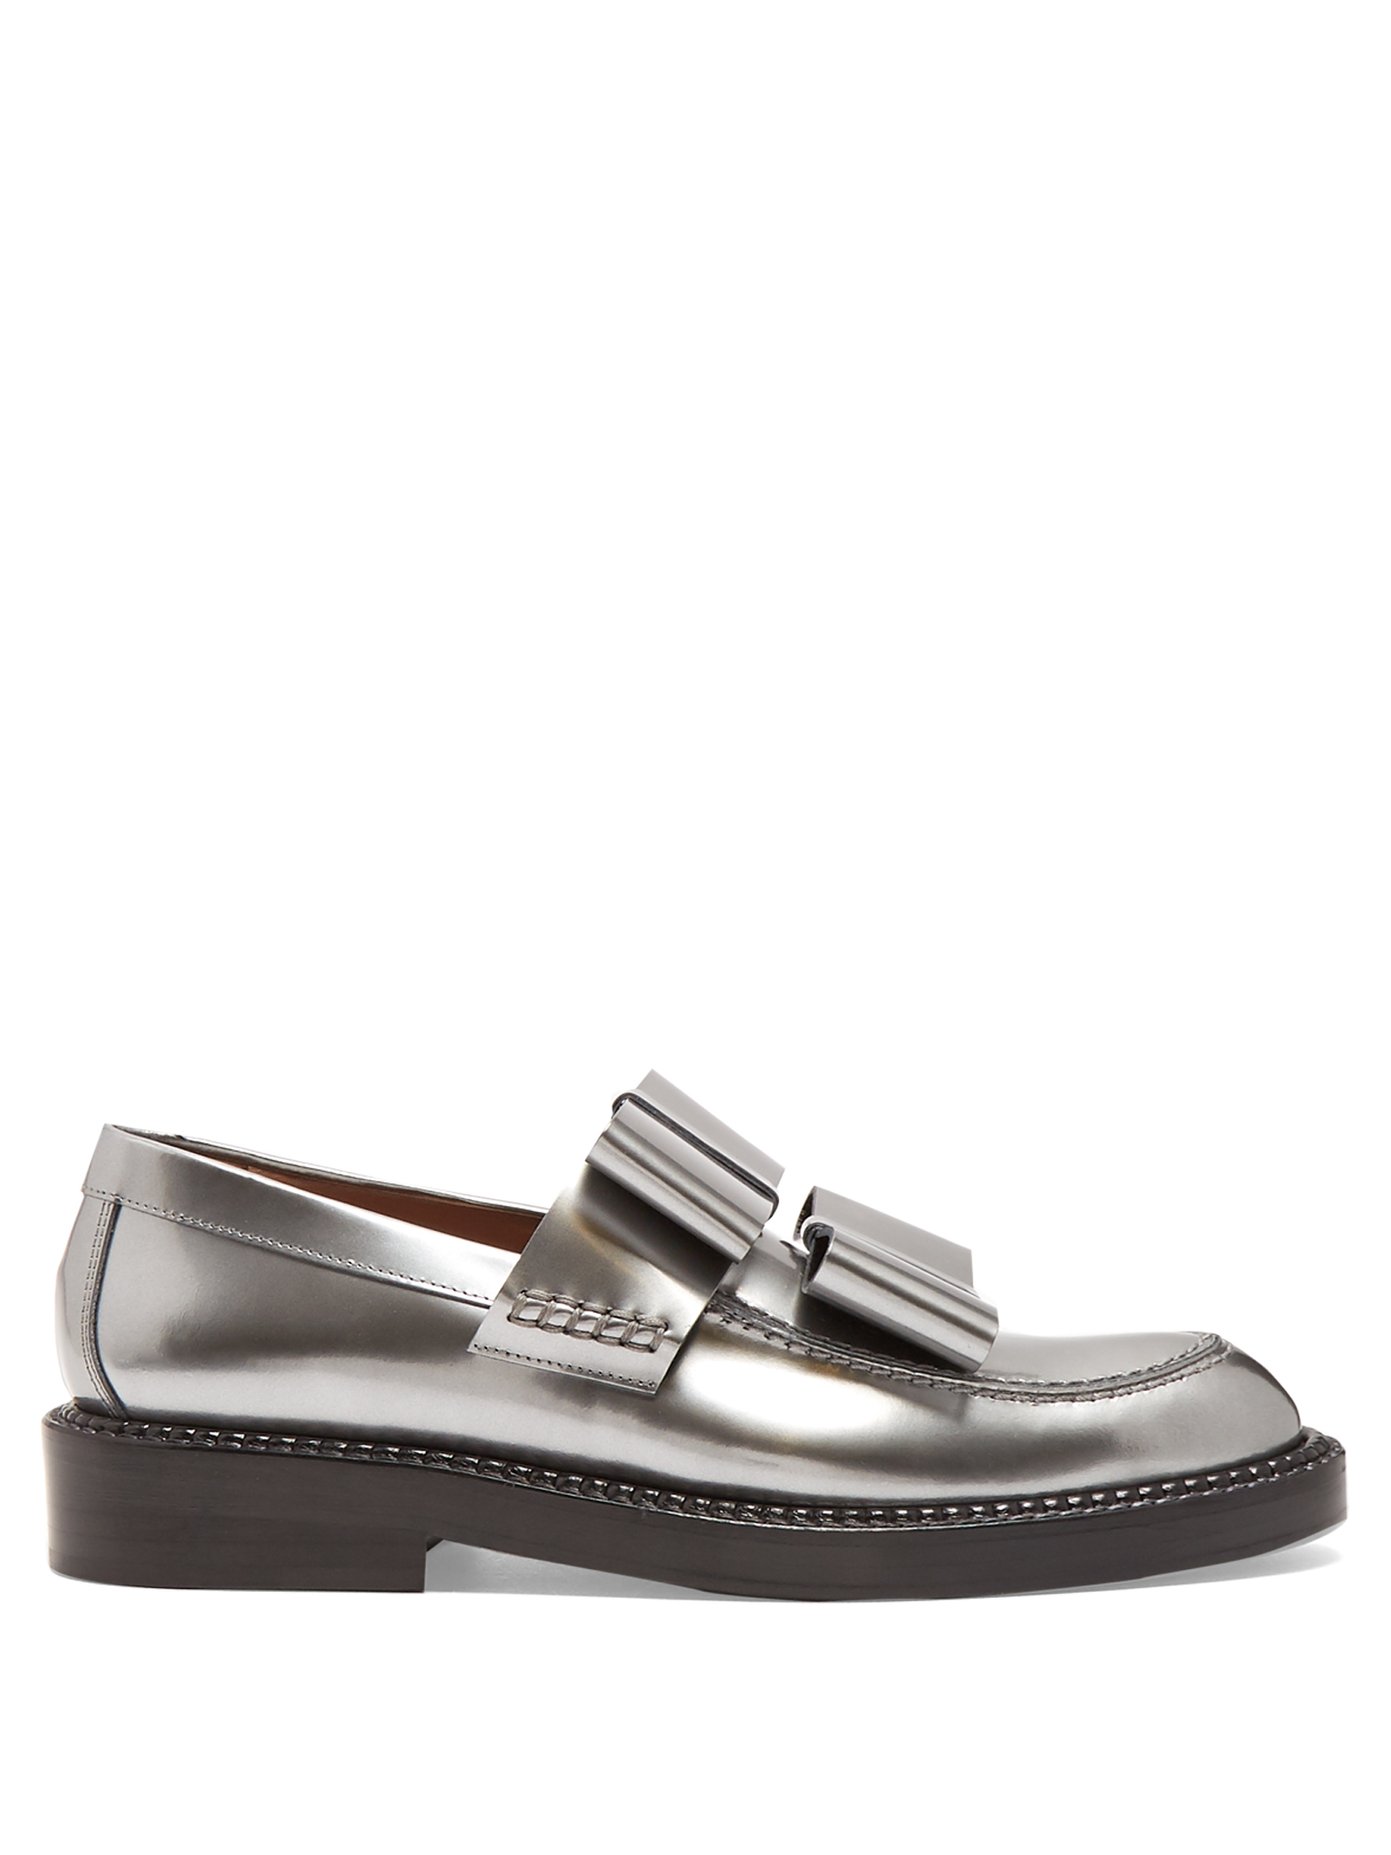 Bow-detail leather loafers | Marni 